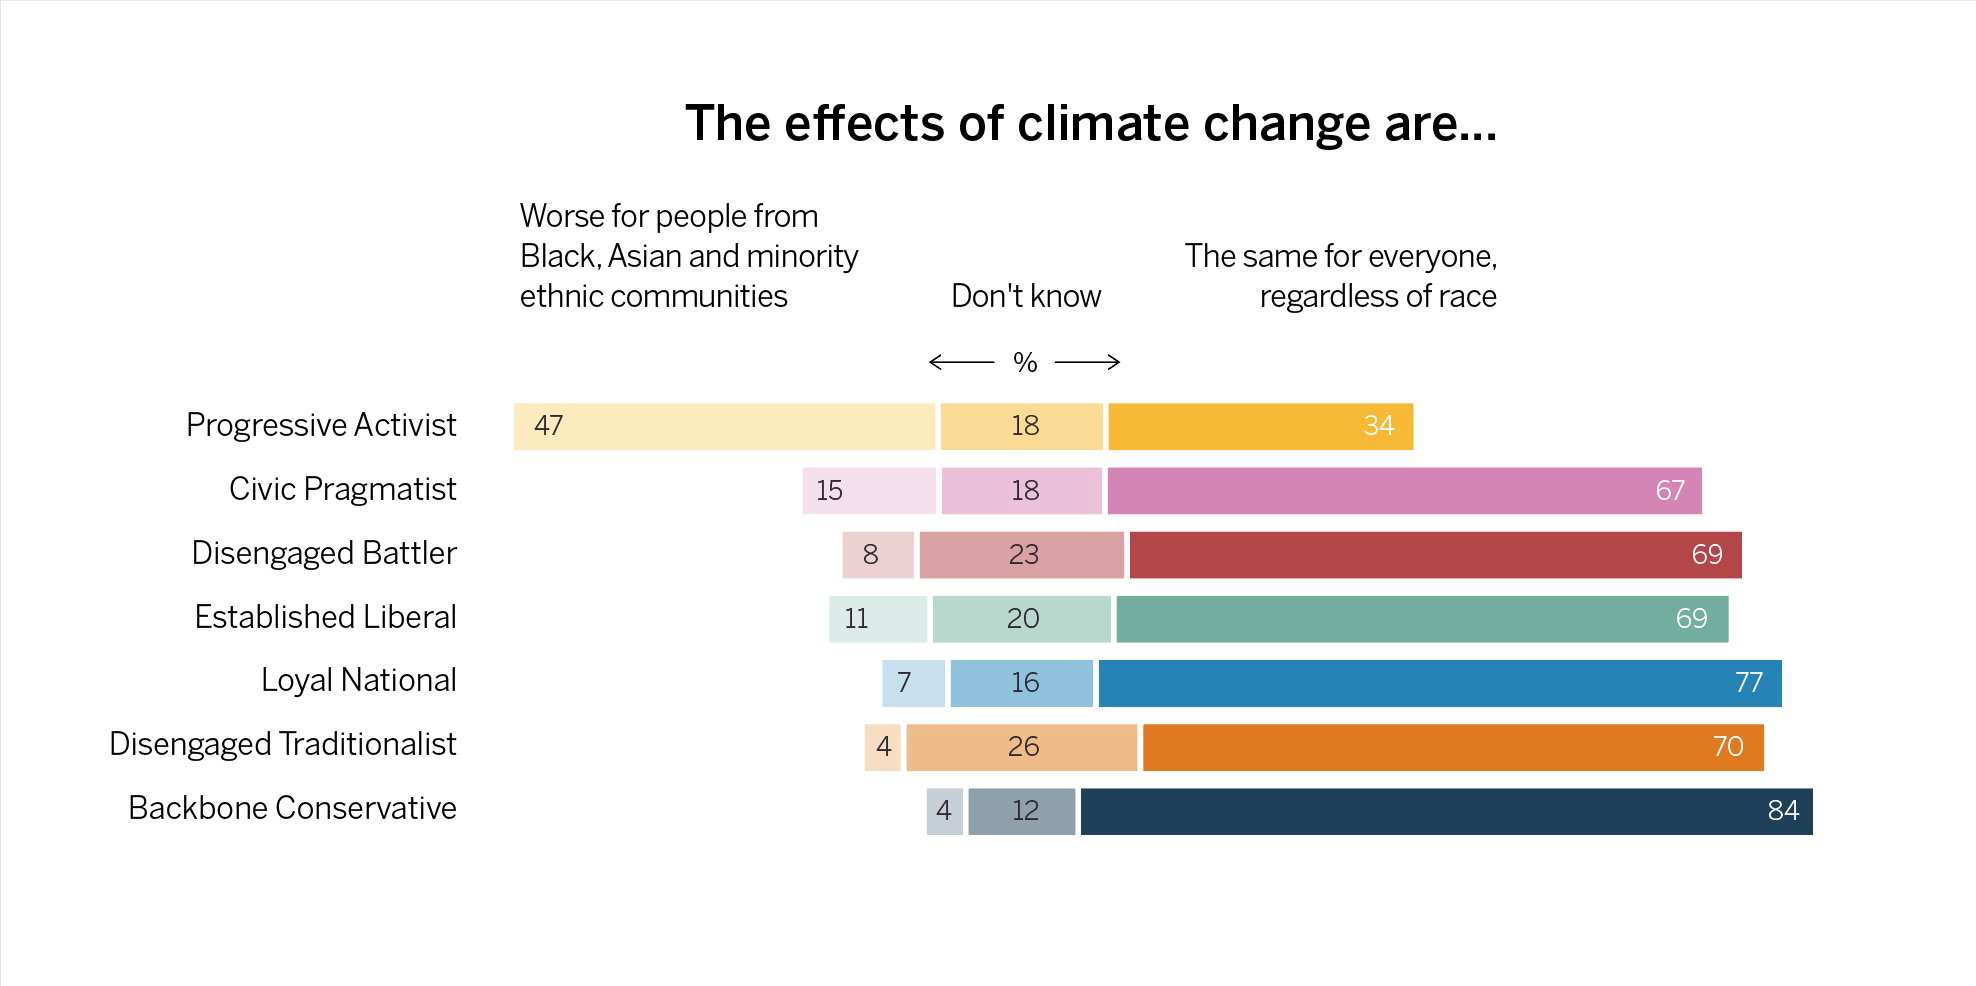 The percentage of people who believe climate change disproportionately affects BAME communities, or for everyone equally